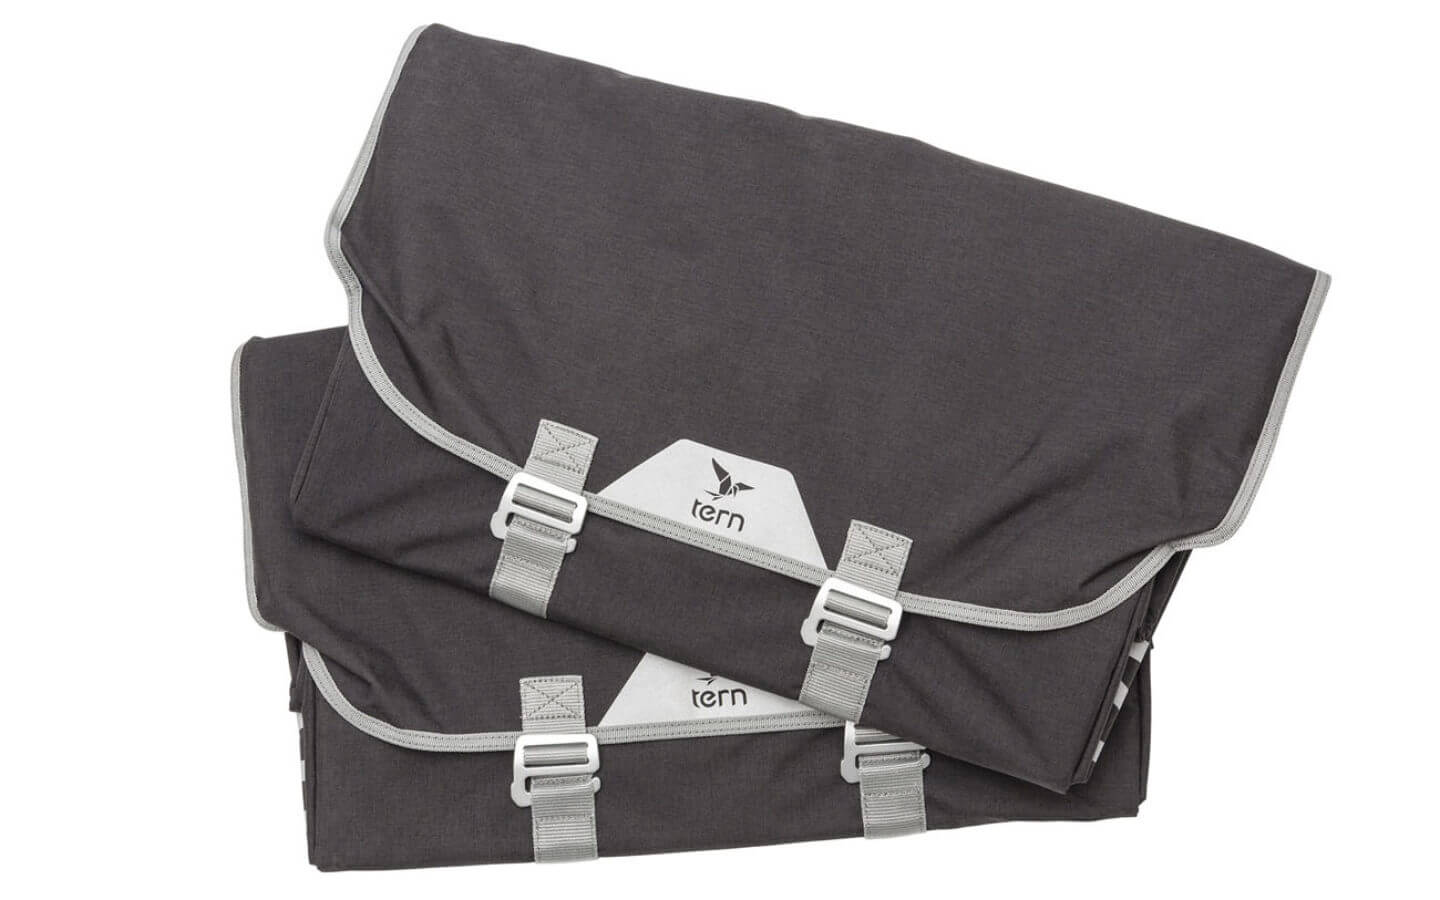 Tern Cargo Hold Panniers for sale - Propel eBikes